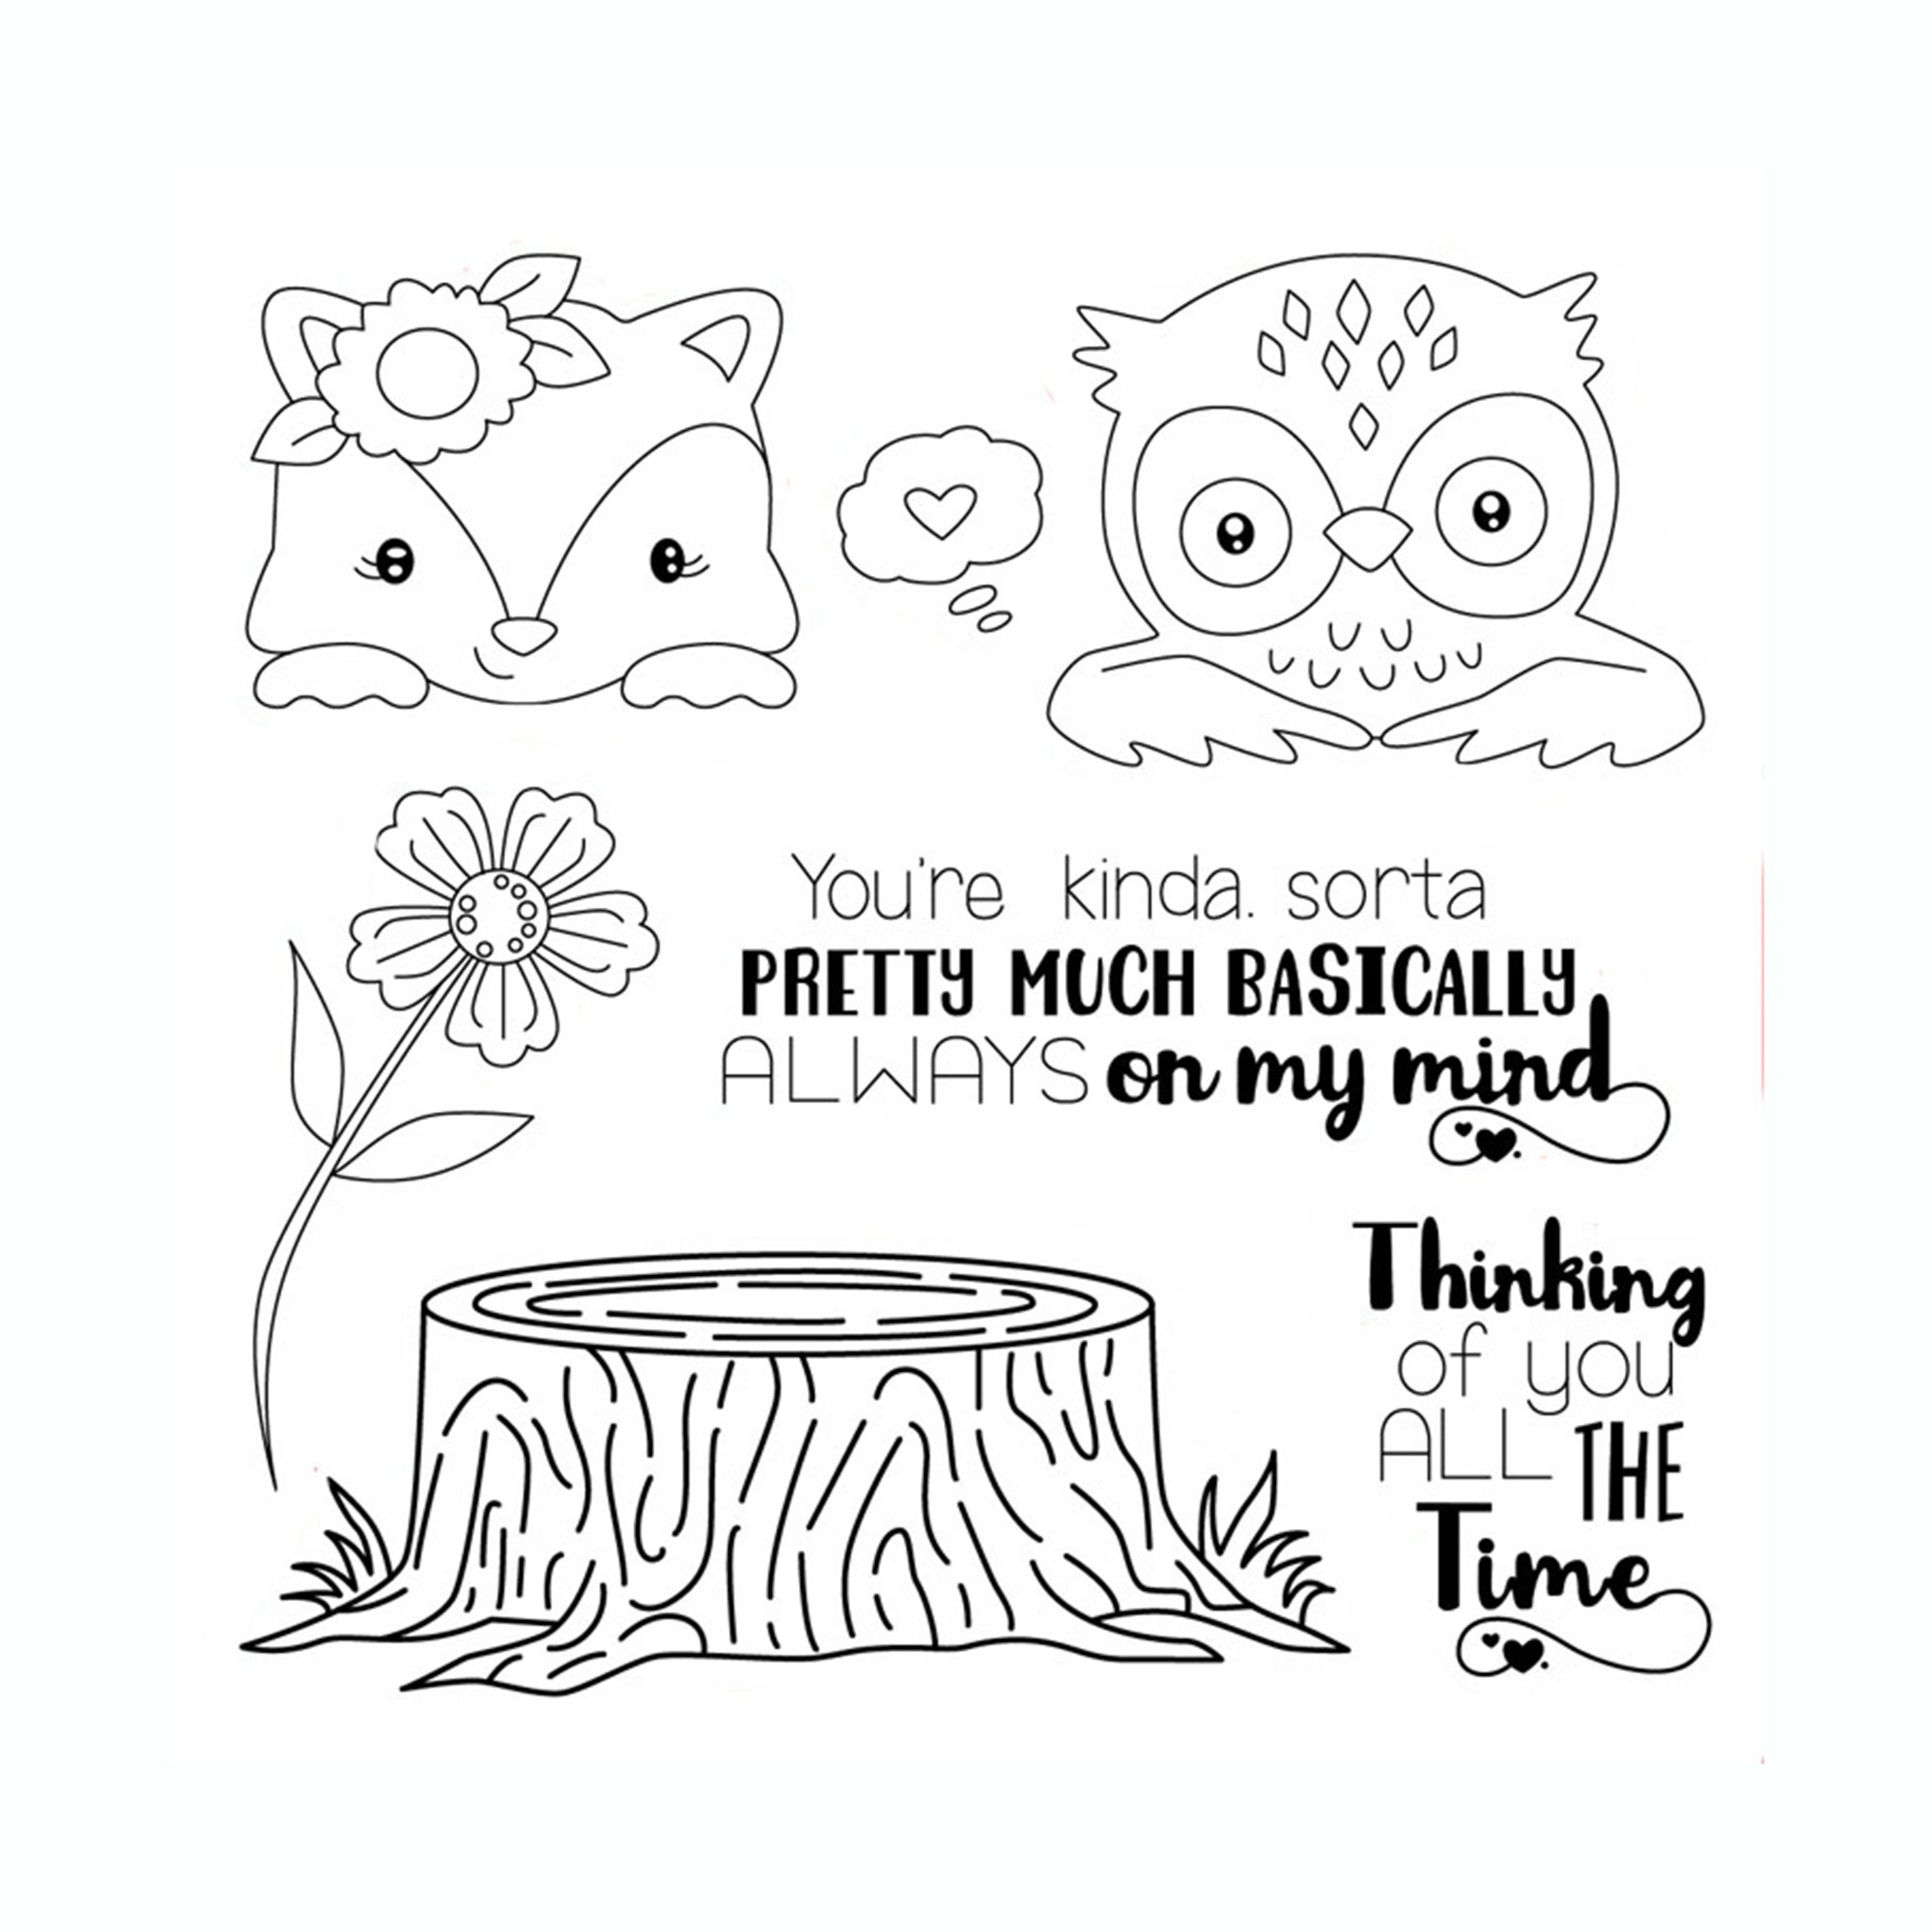 Magic Book Clear Stamps for Card Making, Cats Animal Clear Rubber